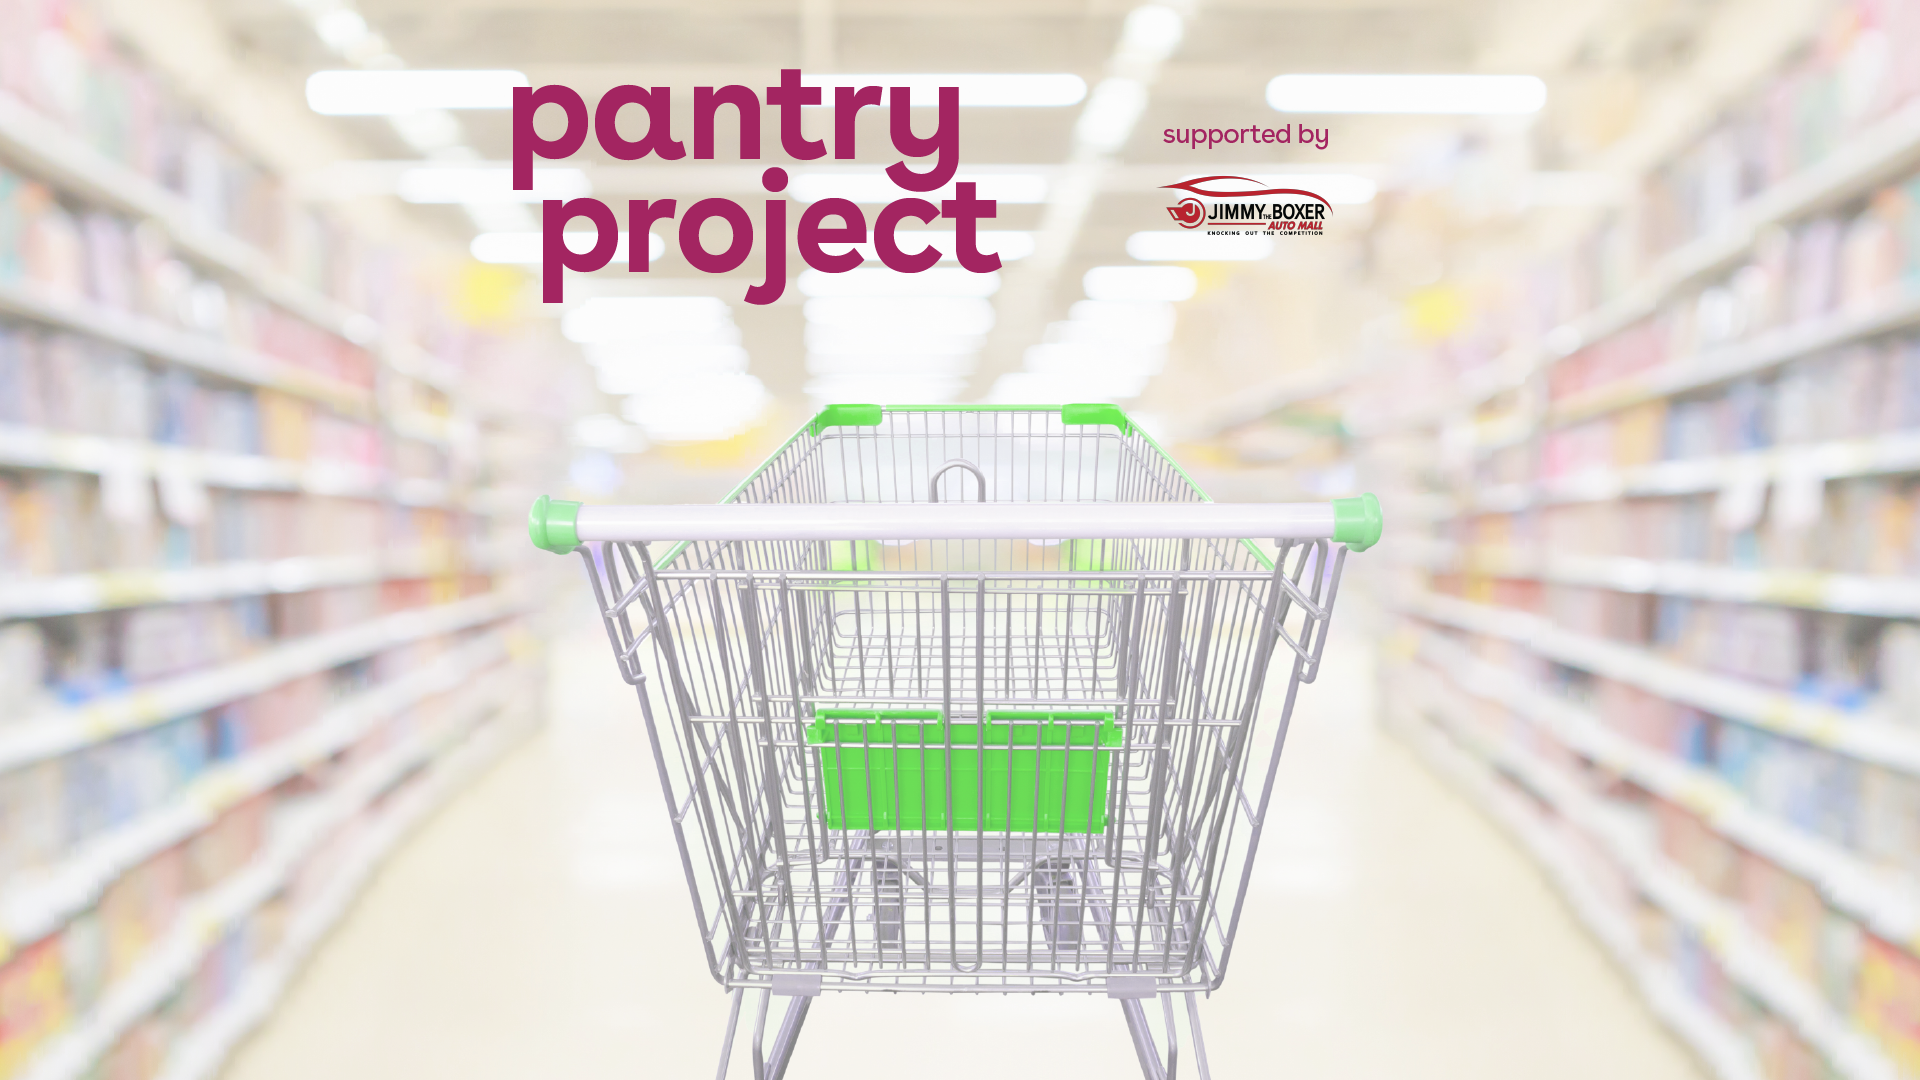 Help provide food for those in need this April with the Pantry Project, supported by Jimmy The Boxer Auto Mall. Click to see locations